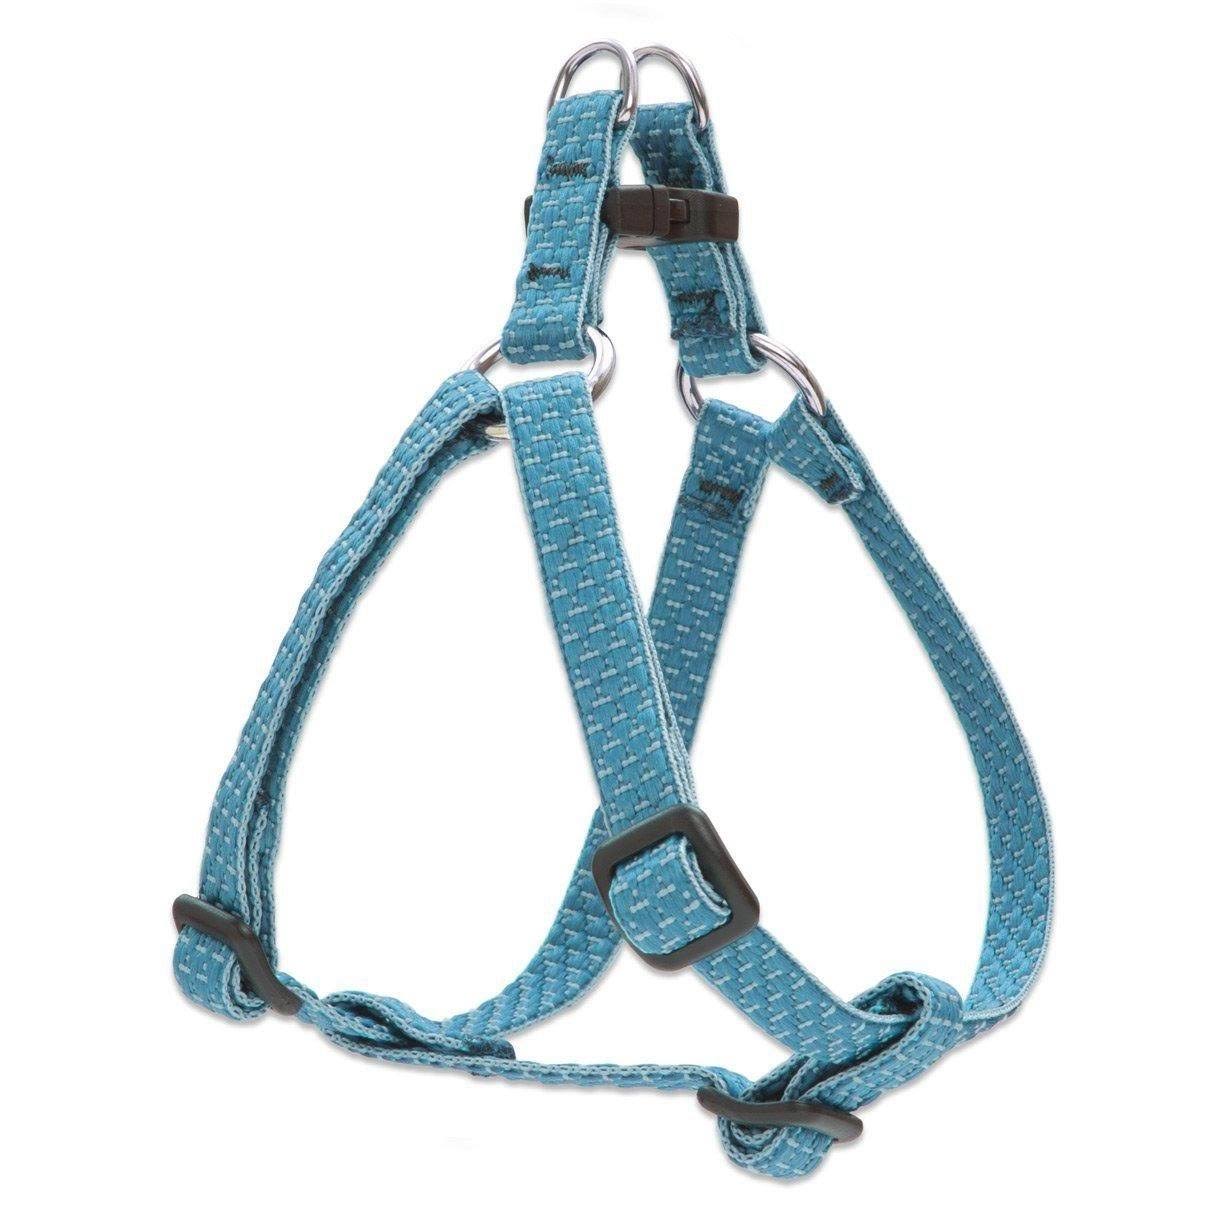 Lupine Eco Small Dog Step In Harness - Tropical Sea, 1/2" X 12" to 18"